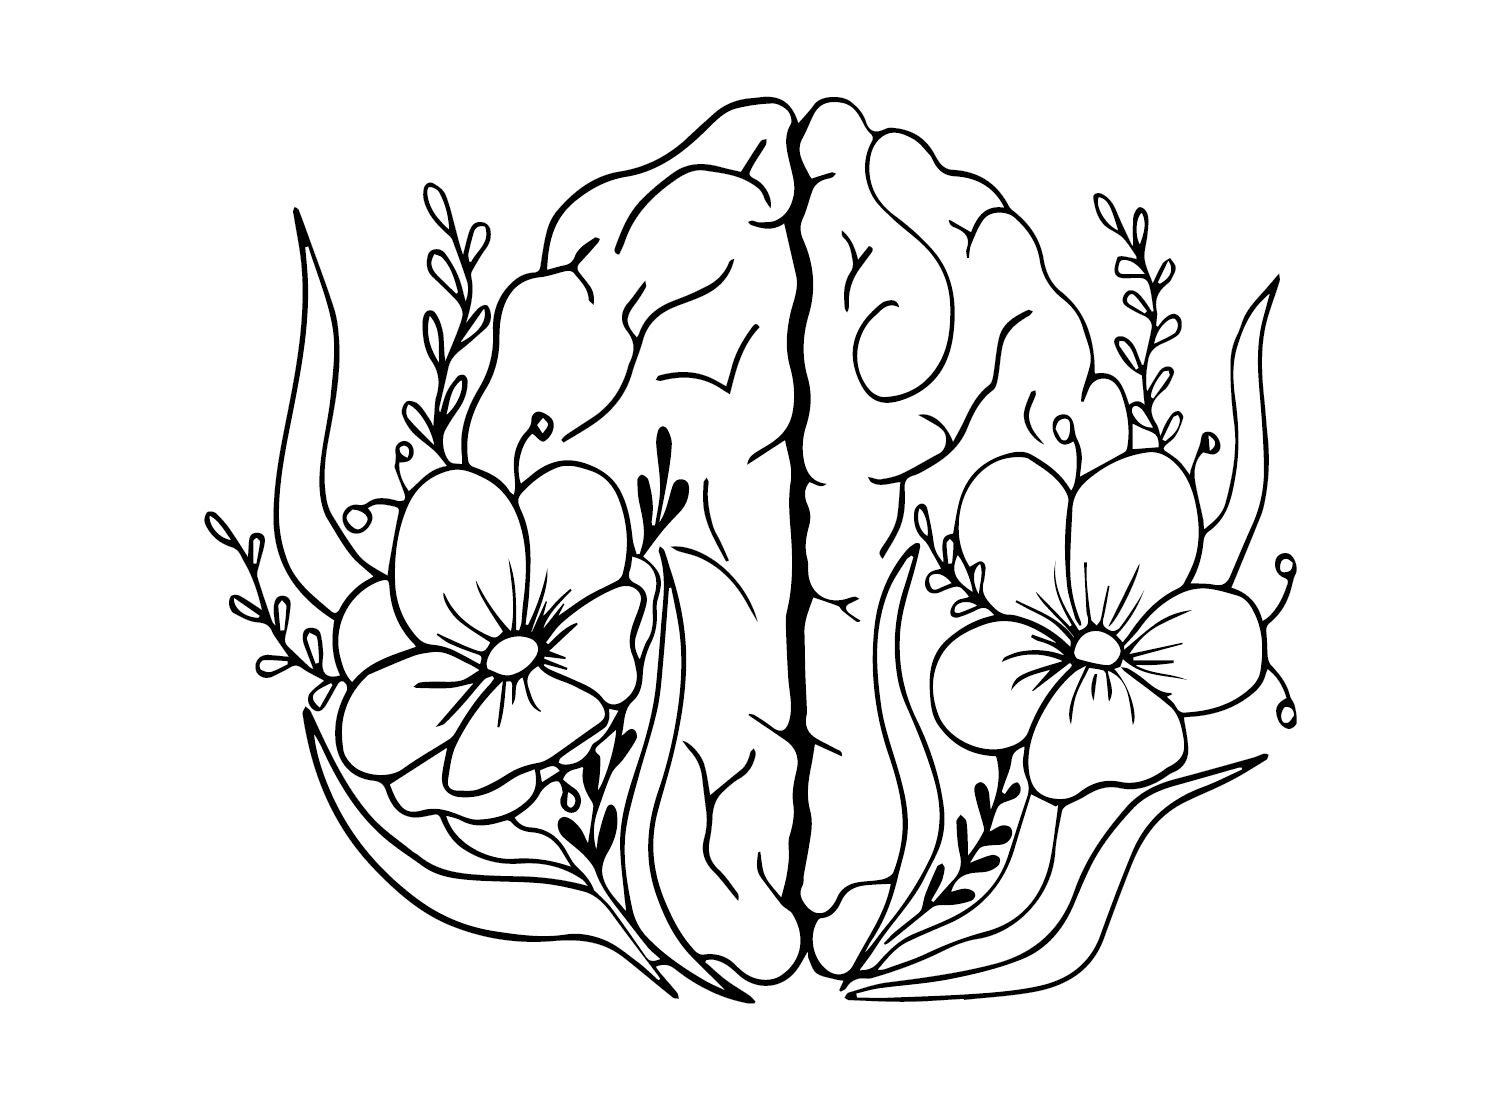 World Mental Health Day Coloring Page